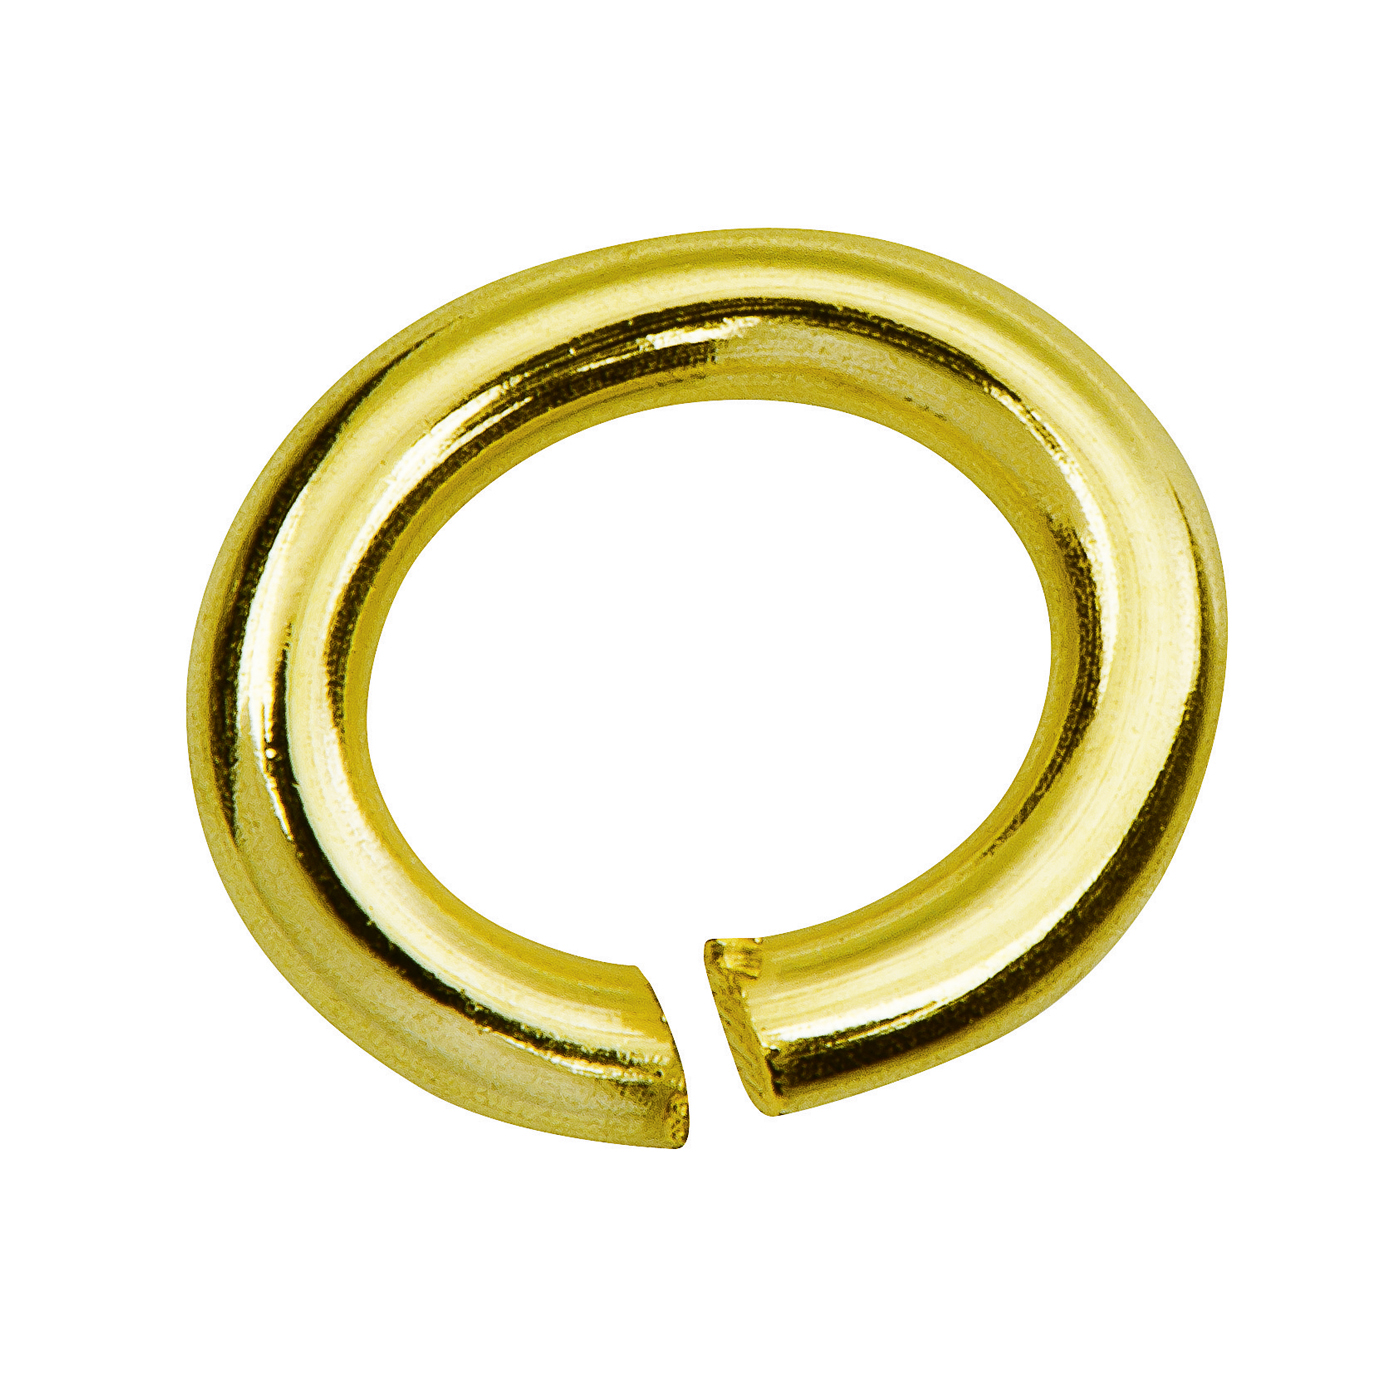 Binding Rings, oval, Doublé, ø 8 mm - 10 pieces